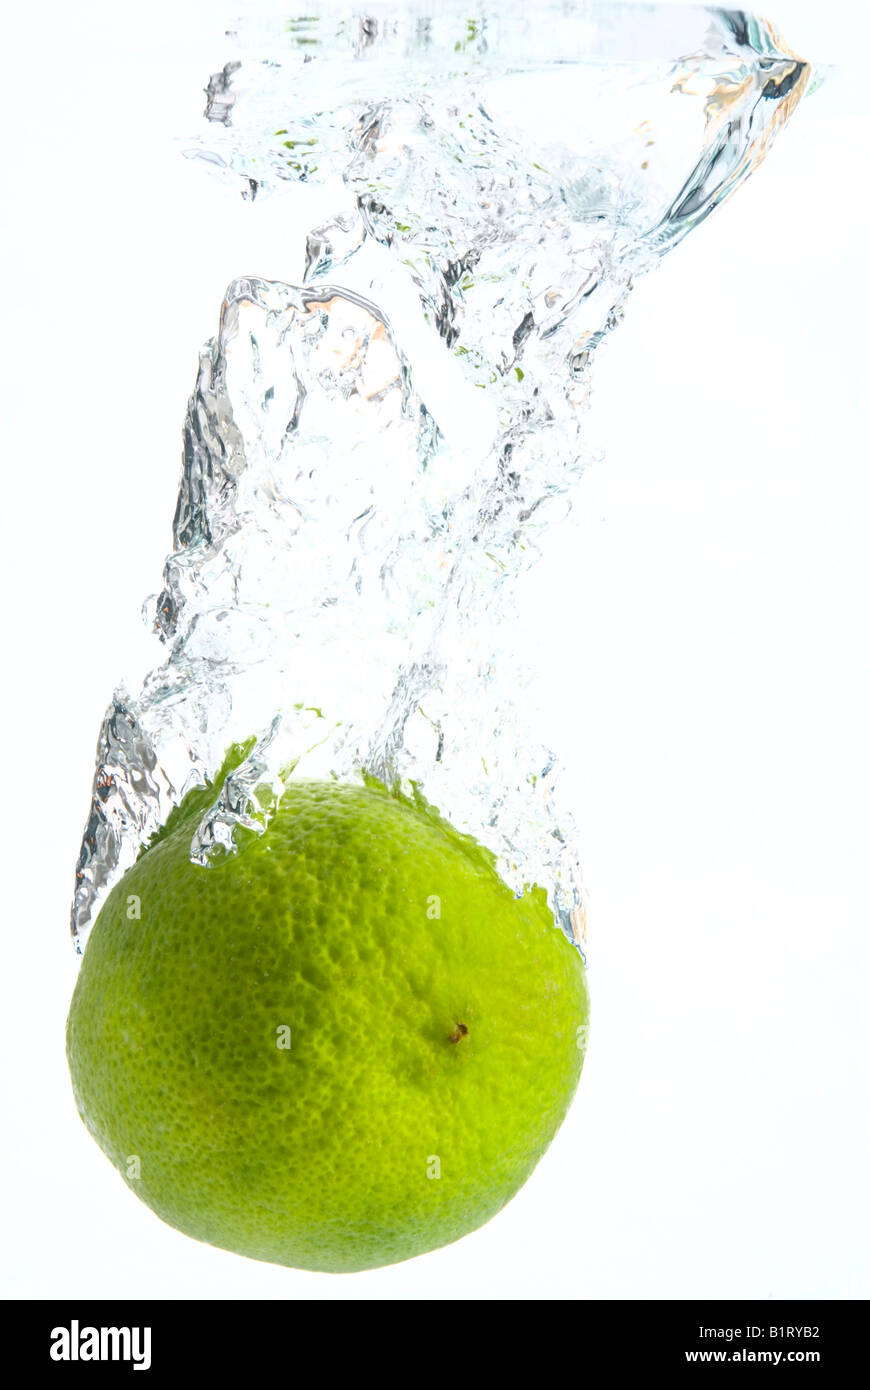 Lime plunging into water Stock Photo